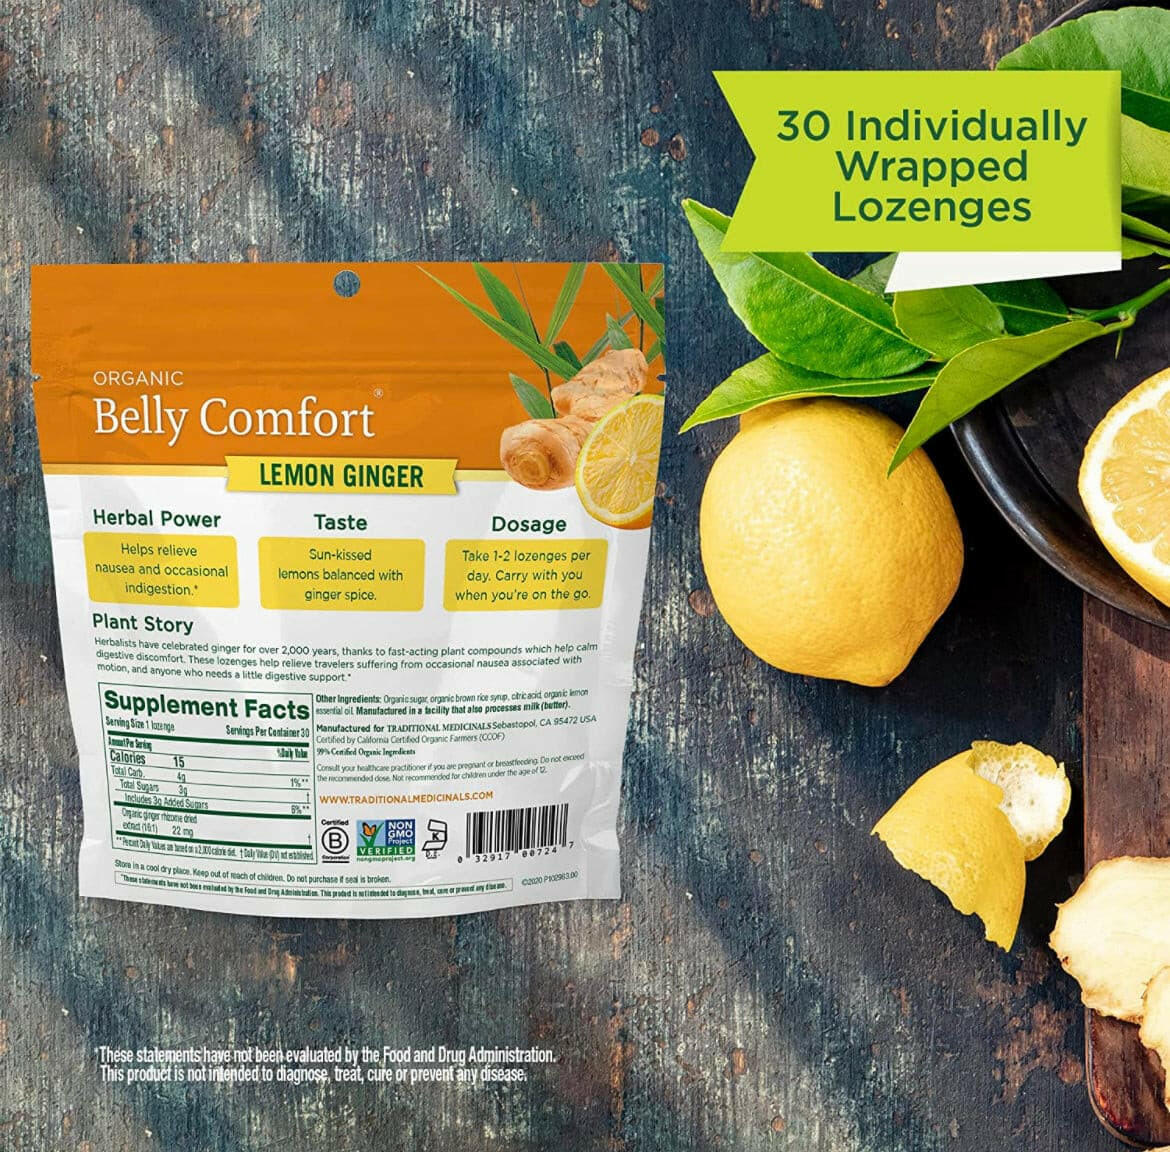 Traditional Medicinals Organic Belly Comfort Lemon Ginger Lozenges - Nausea Relief - 30 Count.